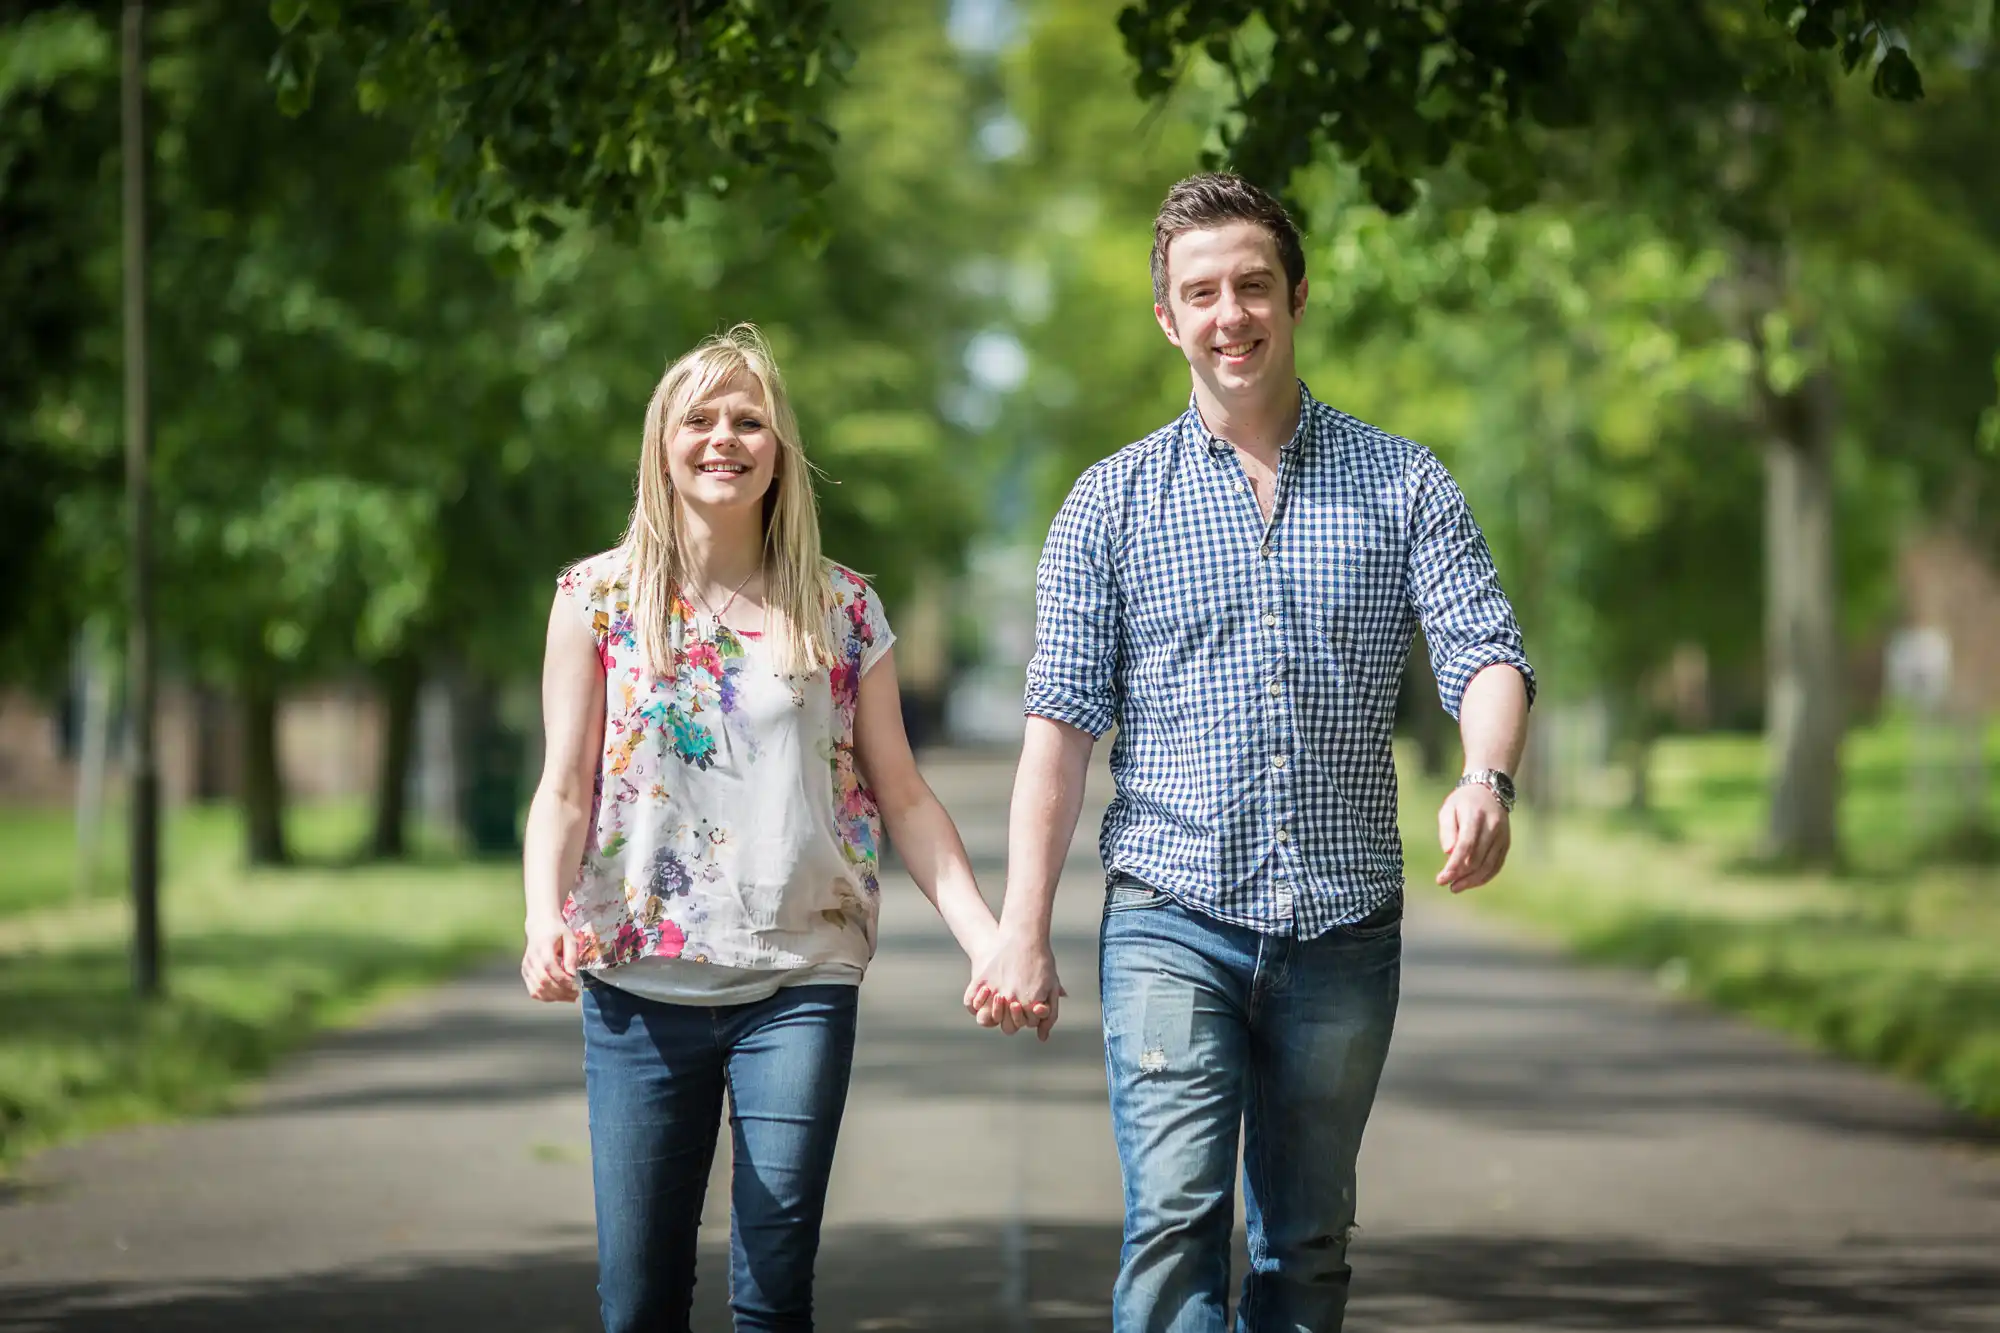 A young man and woman holding hands and smiling while walking down a tree-lined path in a park.